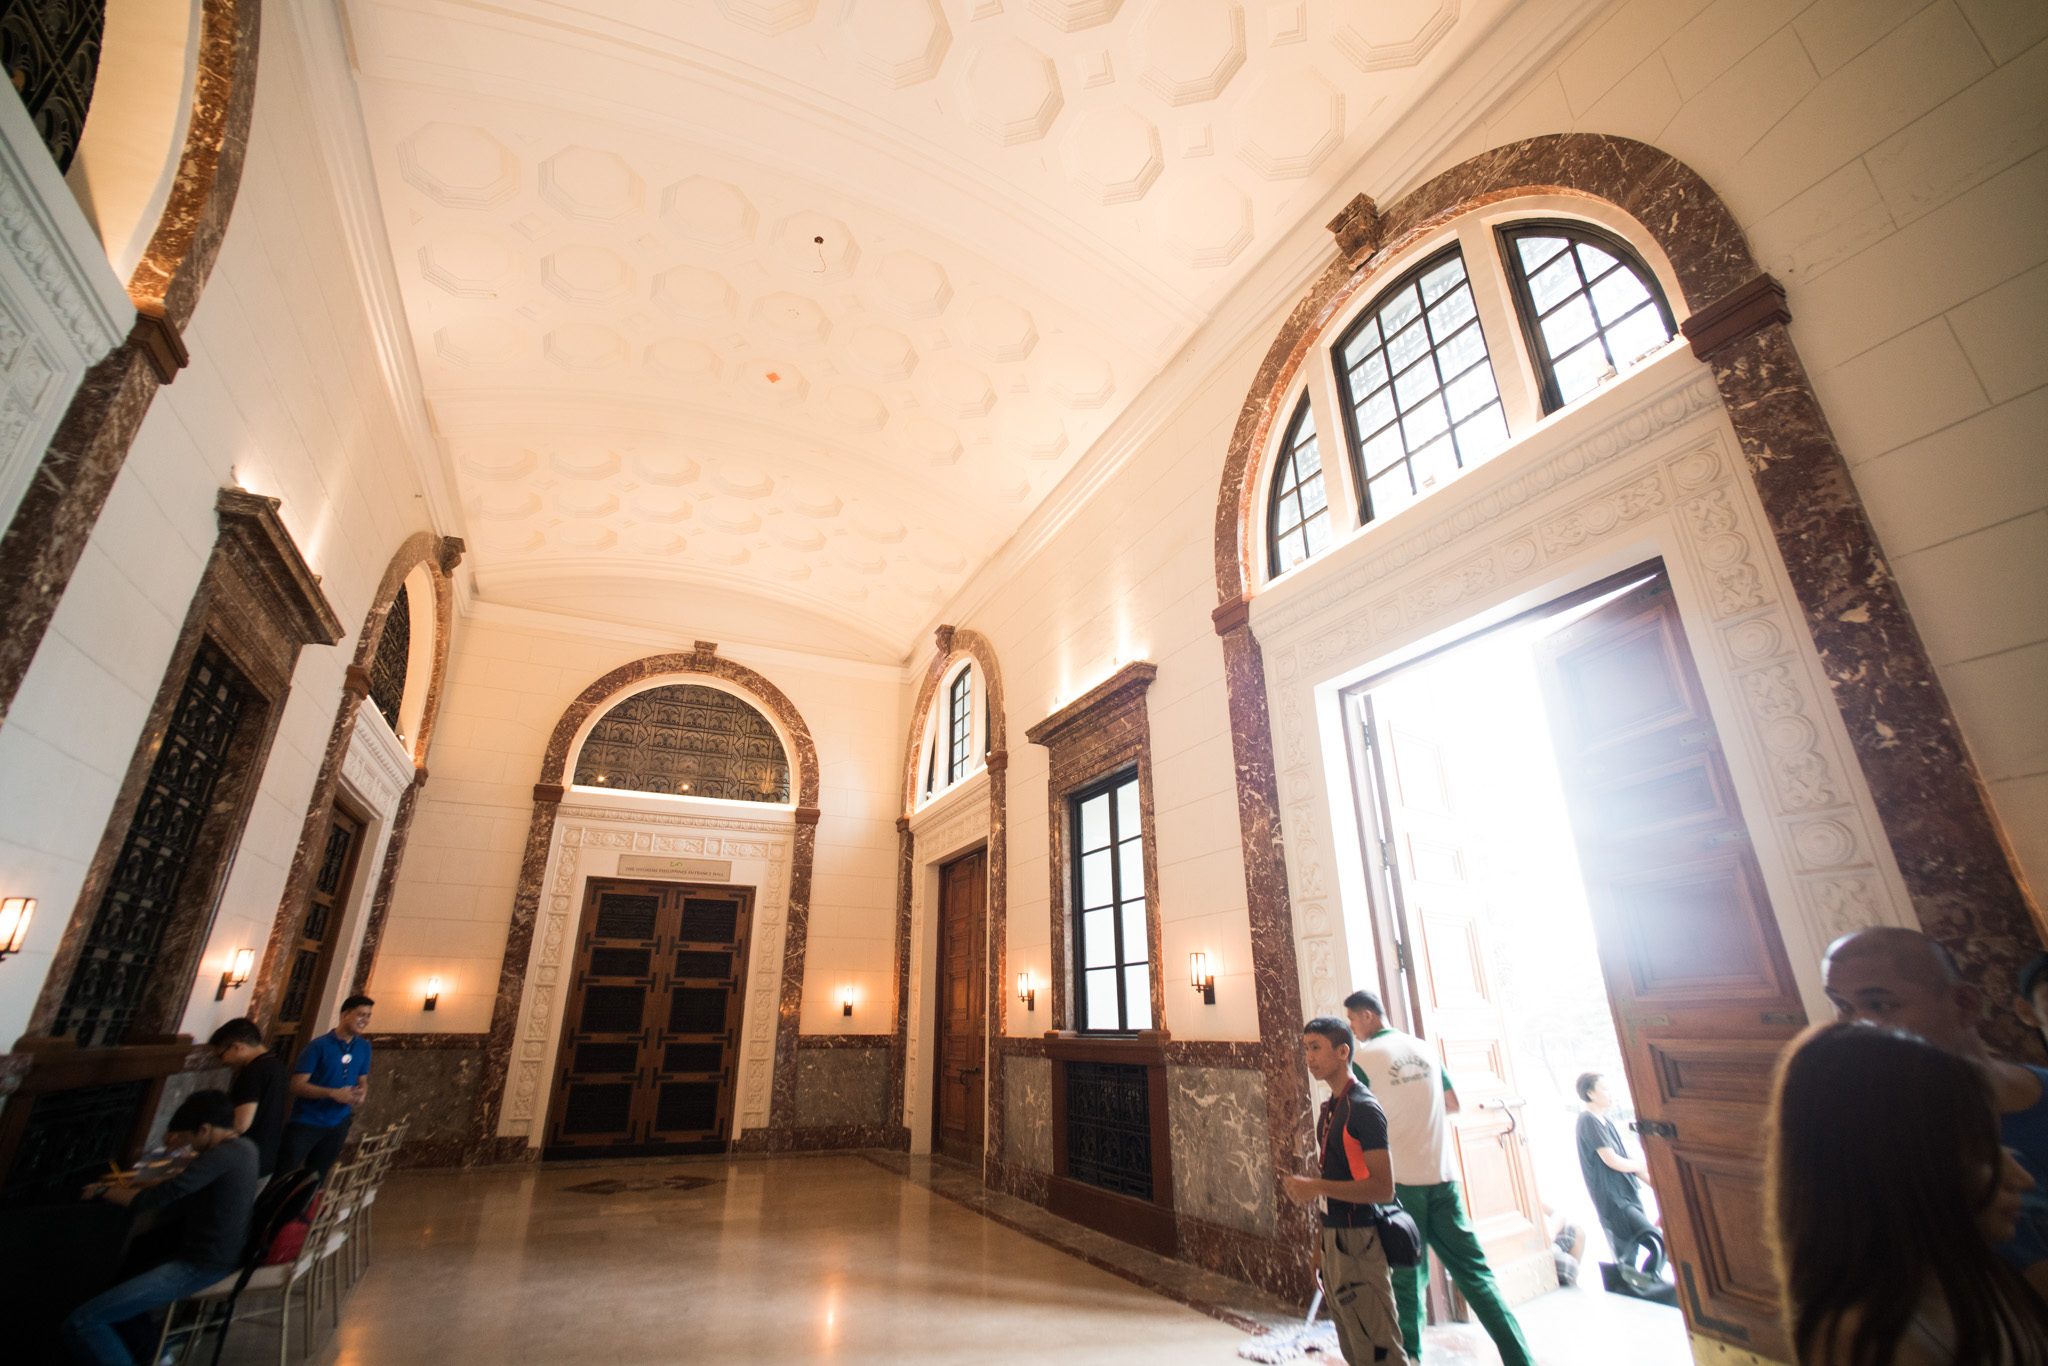 HISTORIC HALLWAYS. The building's neoclassical glory is restored, as seen in the museum's entrance hall. File photo by Martin San Diego/Rappler 